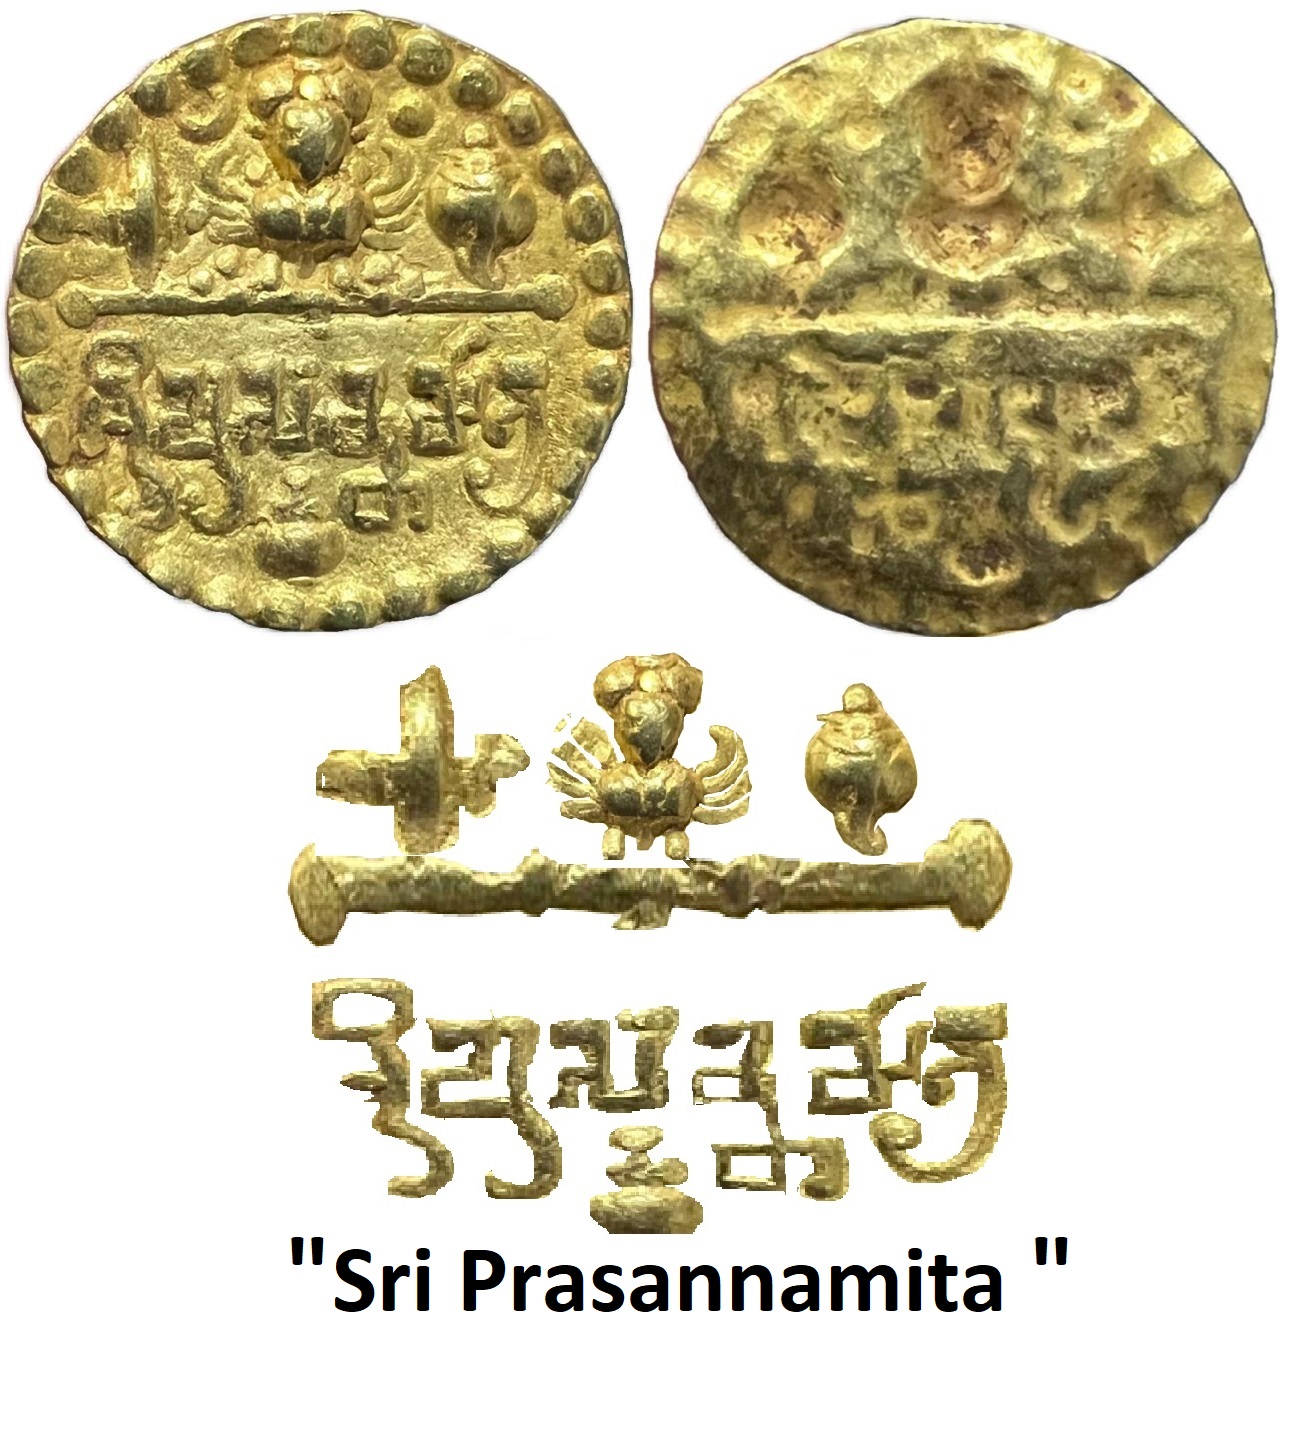 Ancient ; Sarabhapuriyas of Chattisgarh, Sri Prasannamitra* (525-550 AD), Gold Unit, Wt. 1.30g. (Prasannamatra), Obv: figure of Garuda with his wings spread and a conch and a chakra on his either side, brahmi legend below reading sri prasannamitra, vase at the bottom, dotted border around, Rev: blank. *About Uncirculated,* rare.
Remark : The Sarabhapuriya dynasty ruled in modern-day Chhattisgarh in central India, following the collapse of the Gupta empire.